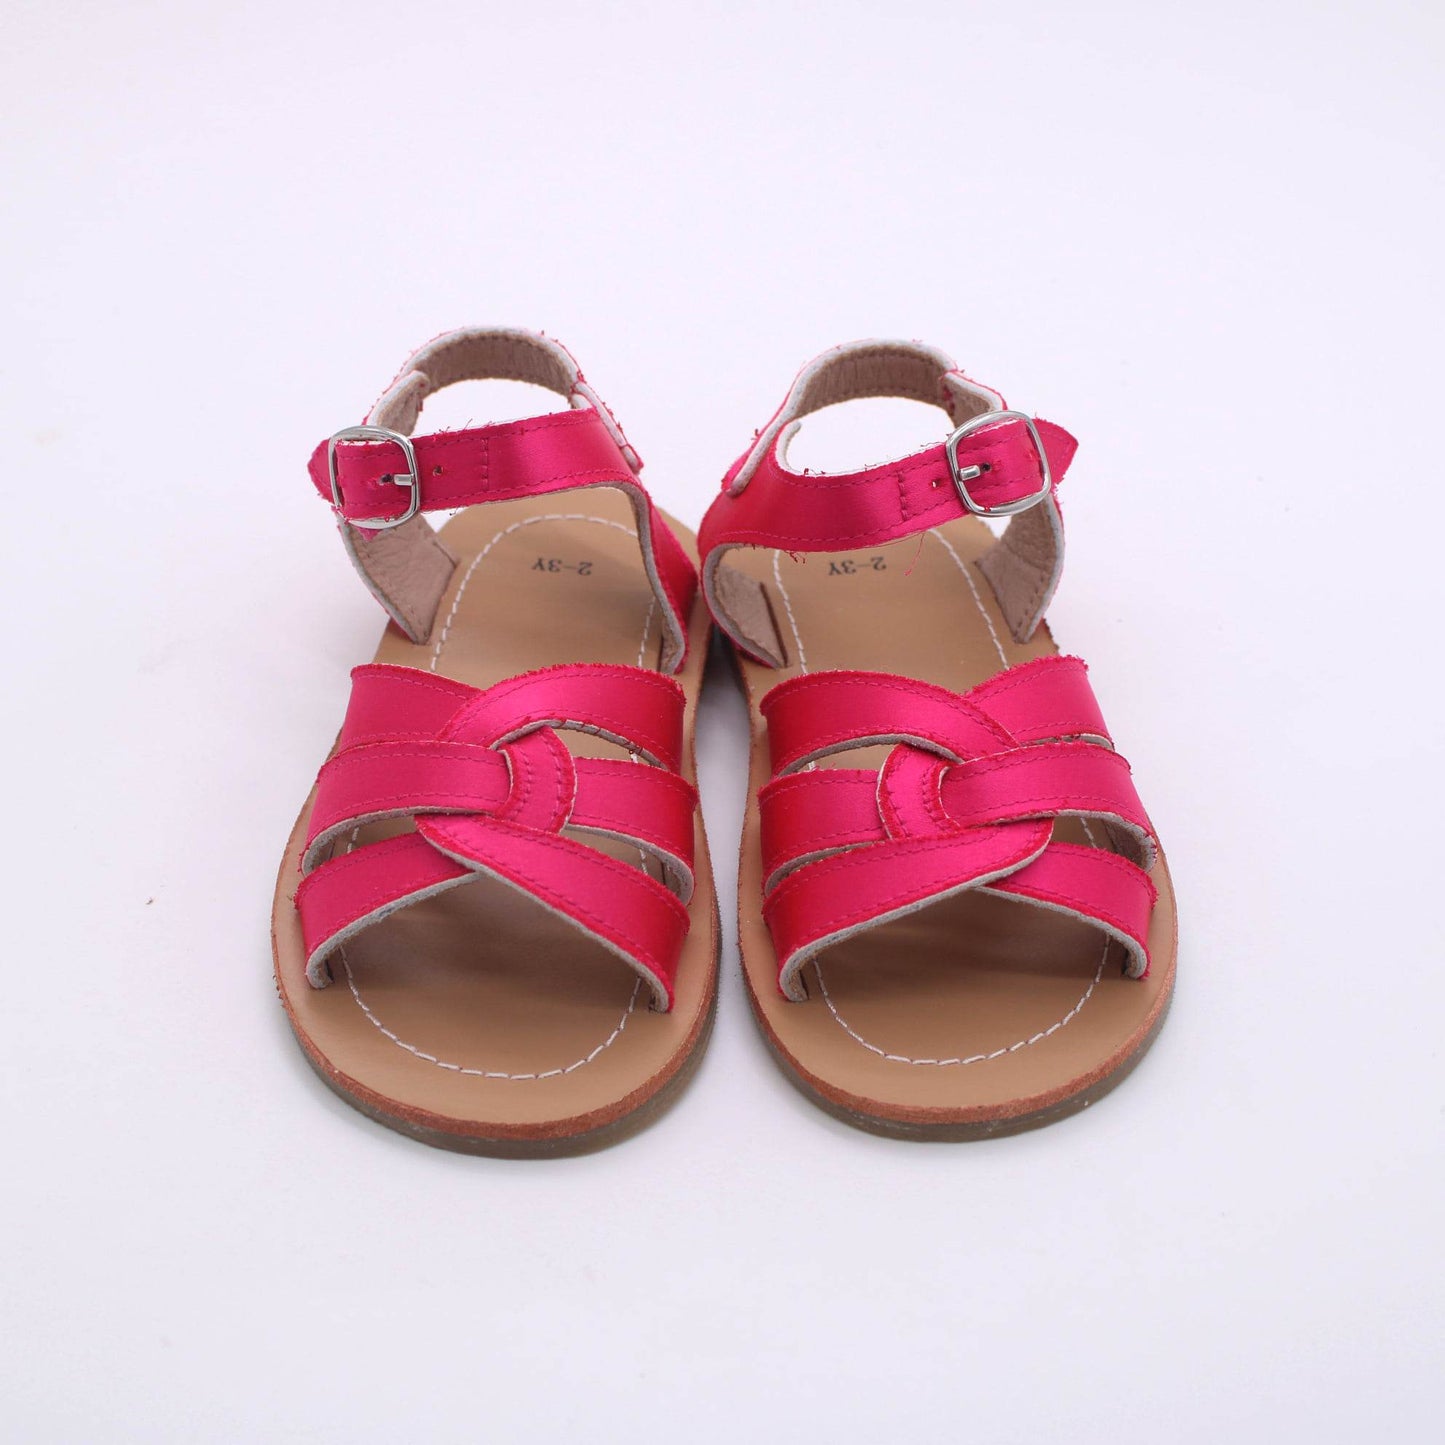 RTS: Vegan Leather Strappy Sandals or Ballet Flats